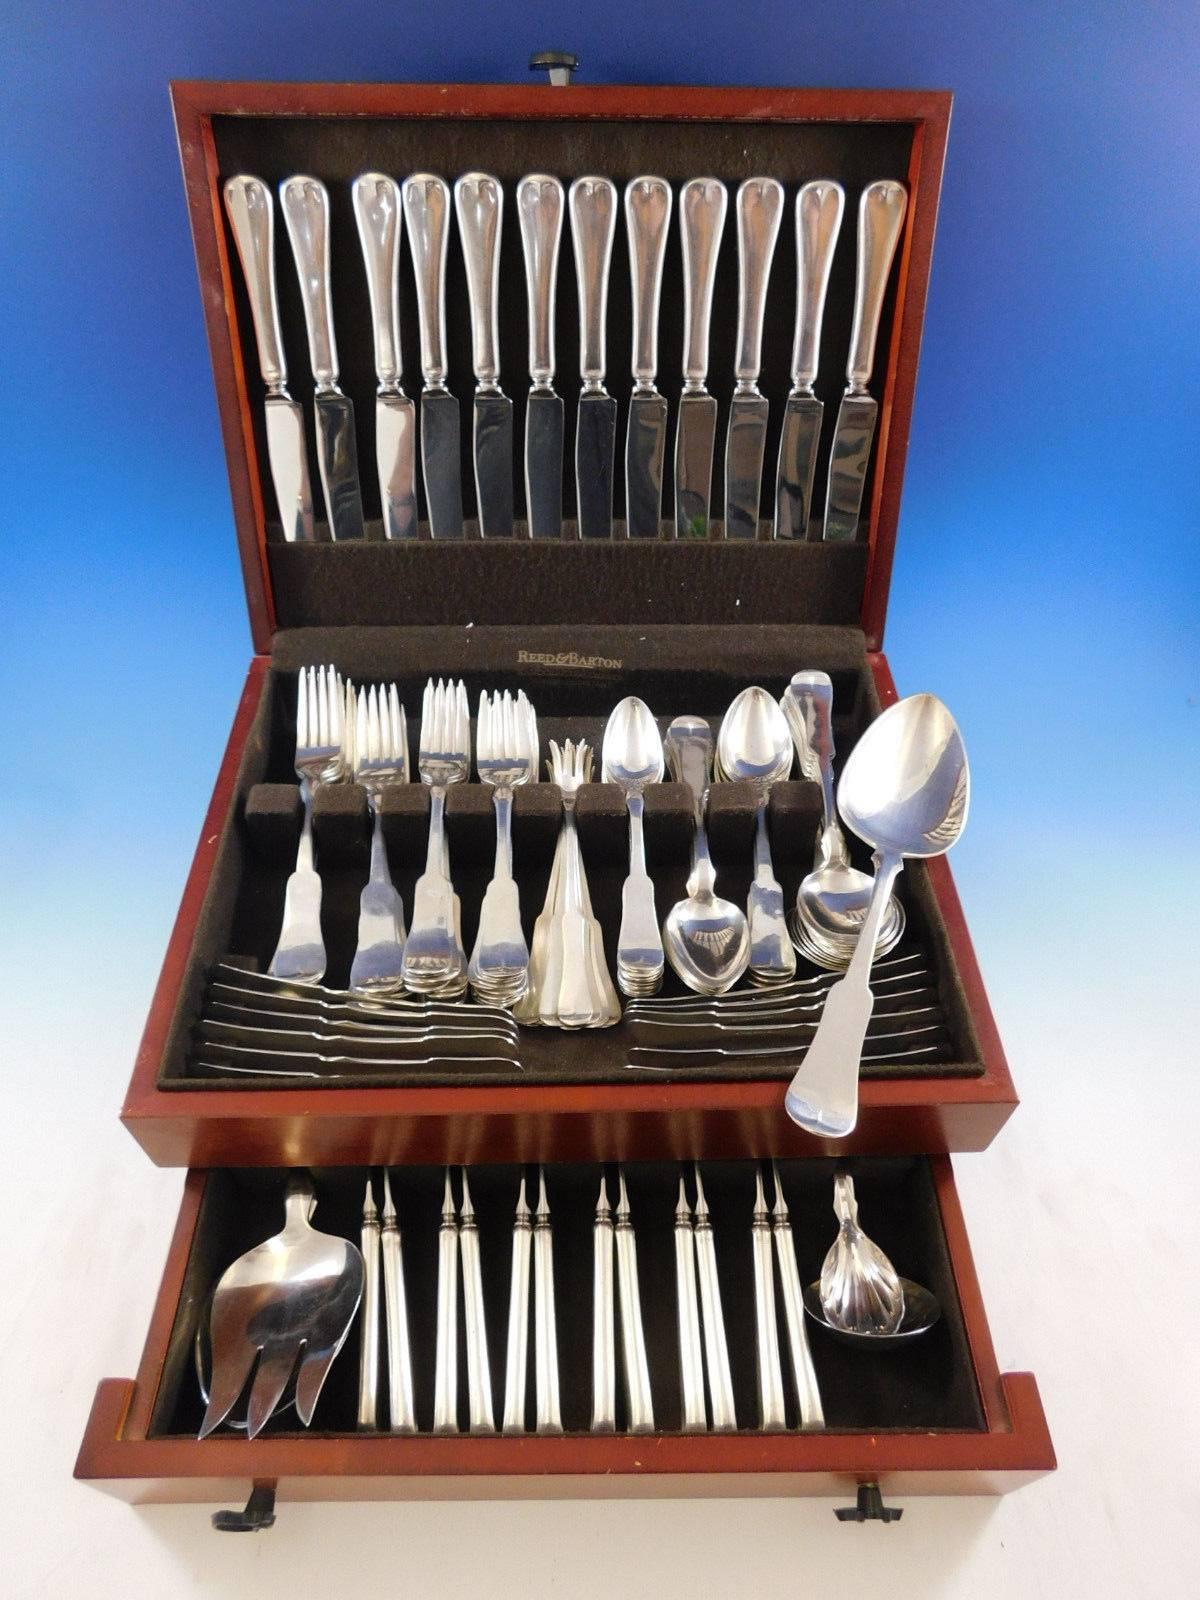 Incredible monumental Grandma Milford by Porter Blanchard sterling silver Flatware set with fiddle shaped handle, 124 pieces. This scarce set is handmade and truly a work of art. This set includes:

12 Dinner Size Knives, 9 5/8